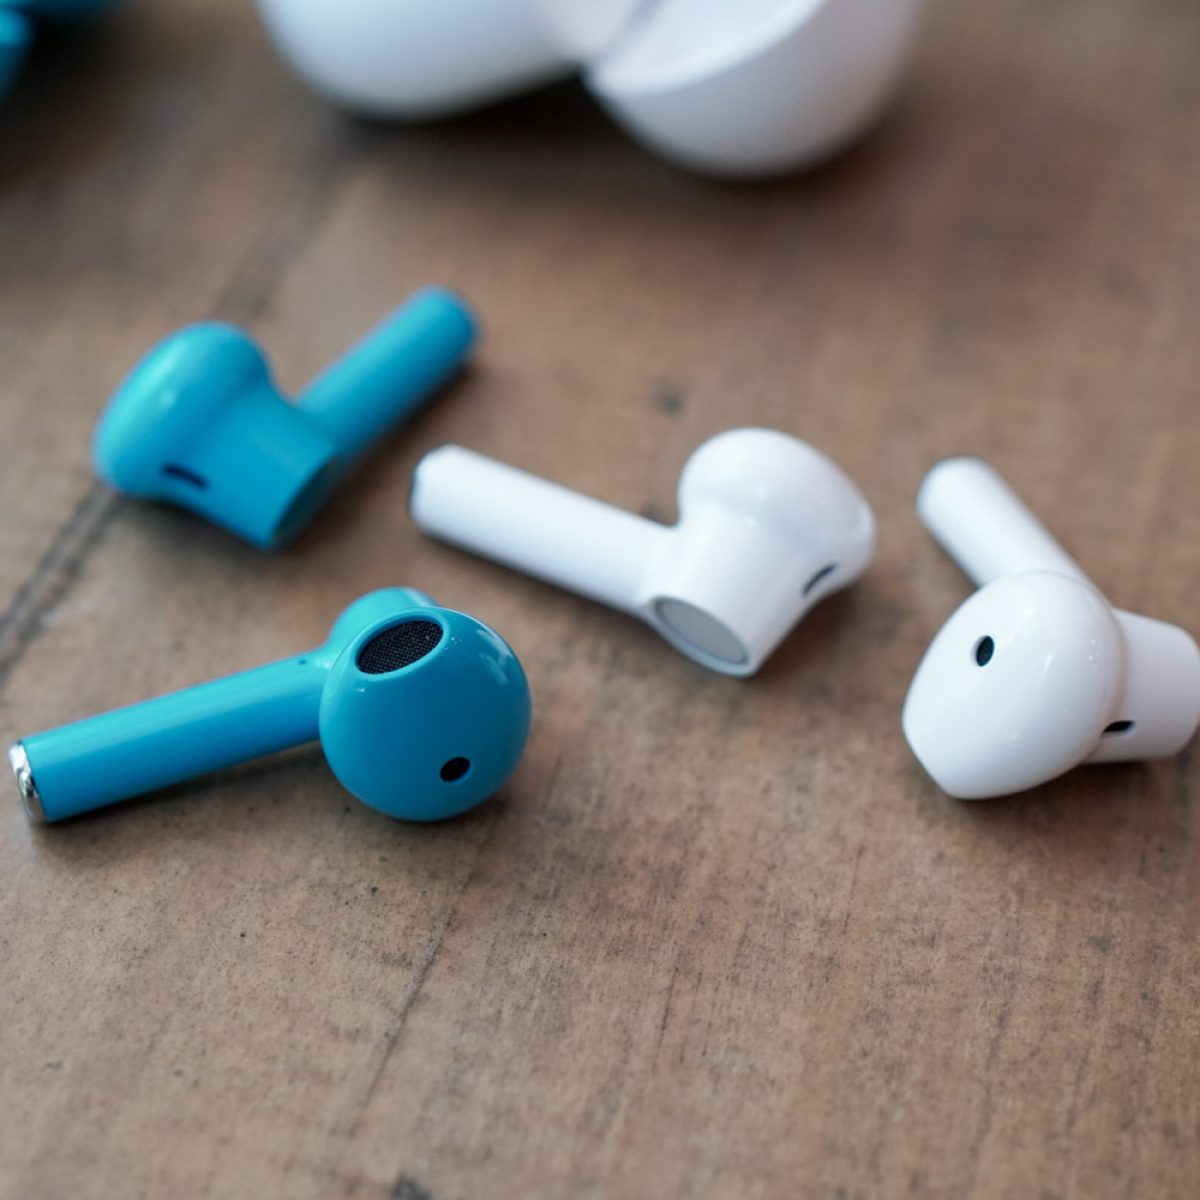 OnePlus Buds Review: Affordable True Wireless Earbuds